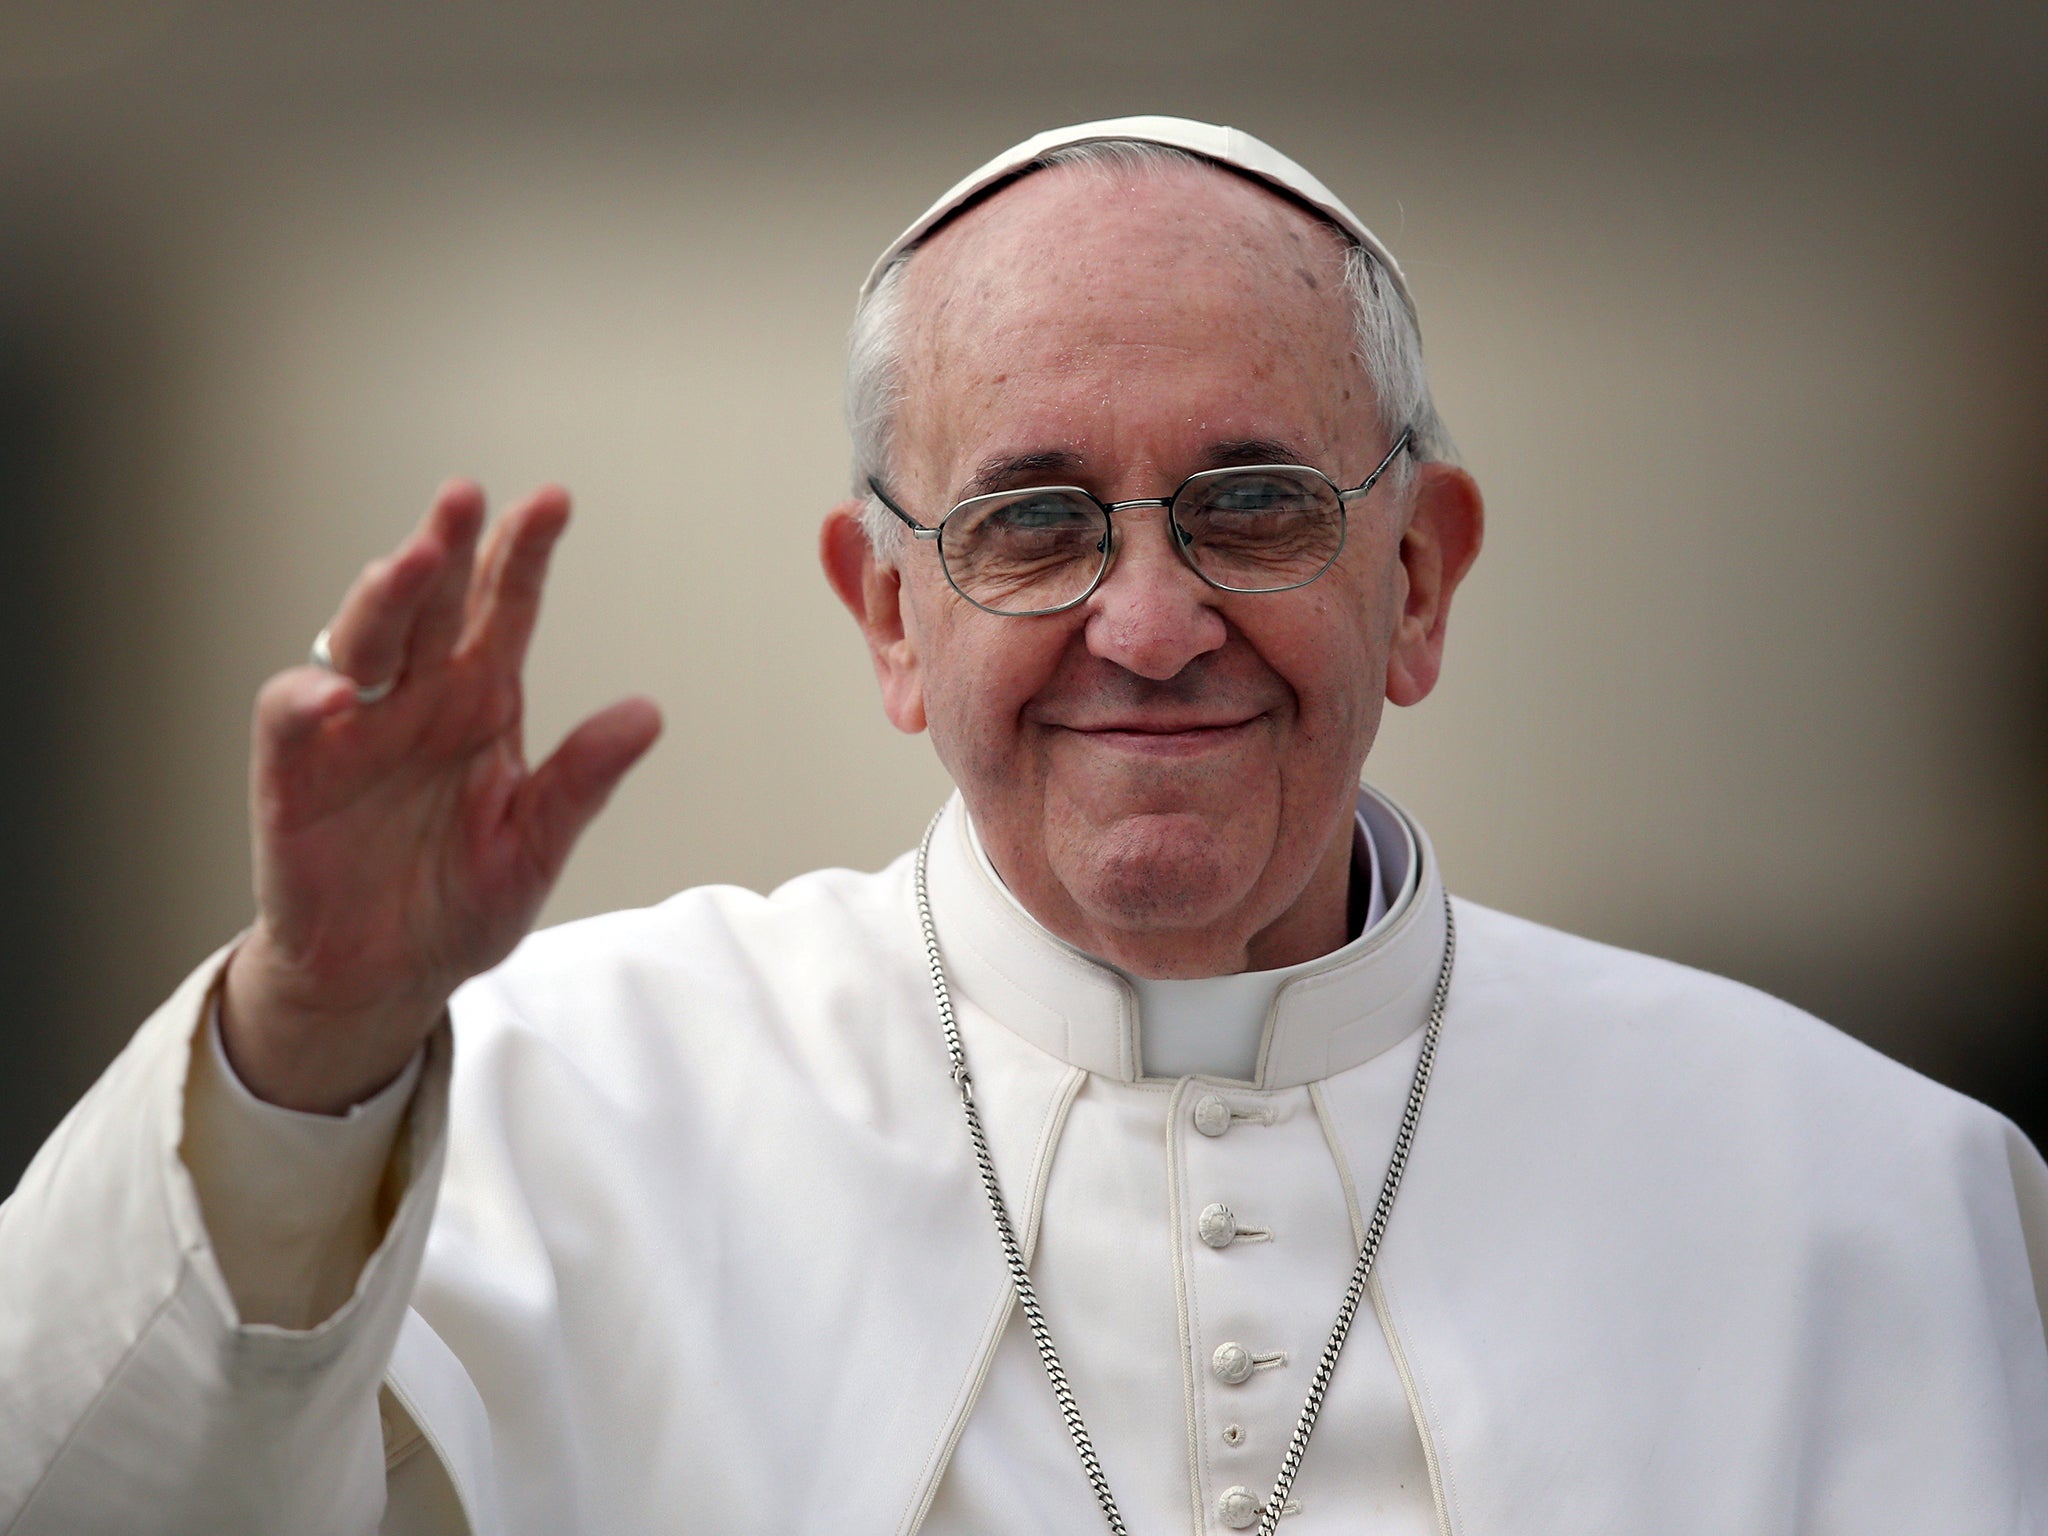 Pope Francis will hold a papal mass in Philadelphia